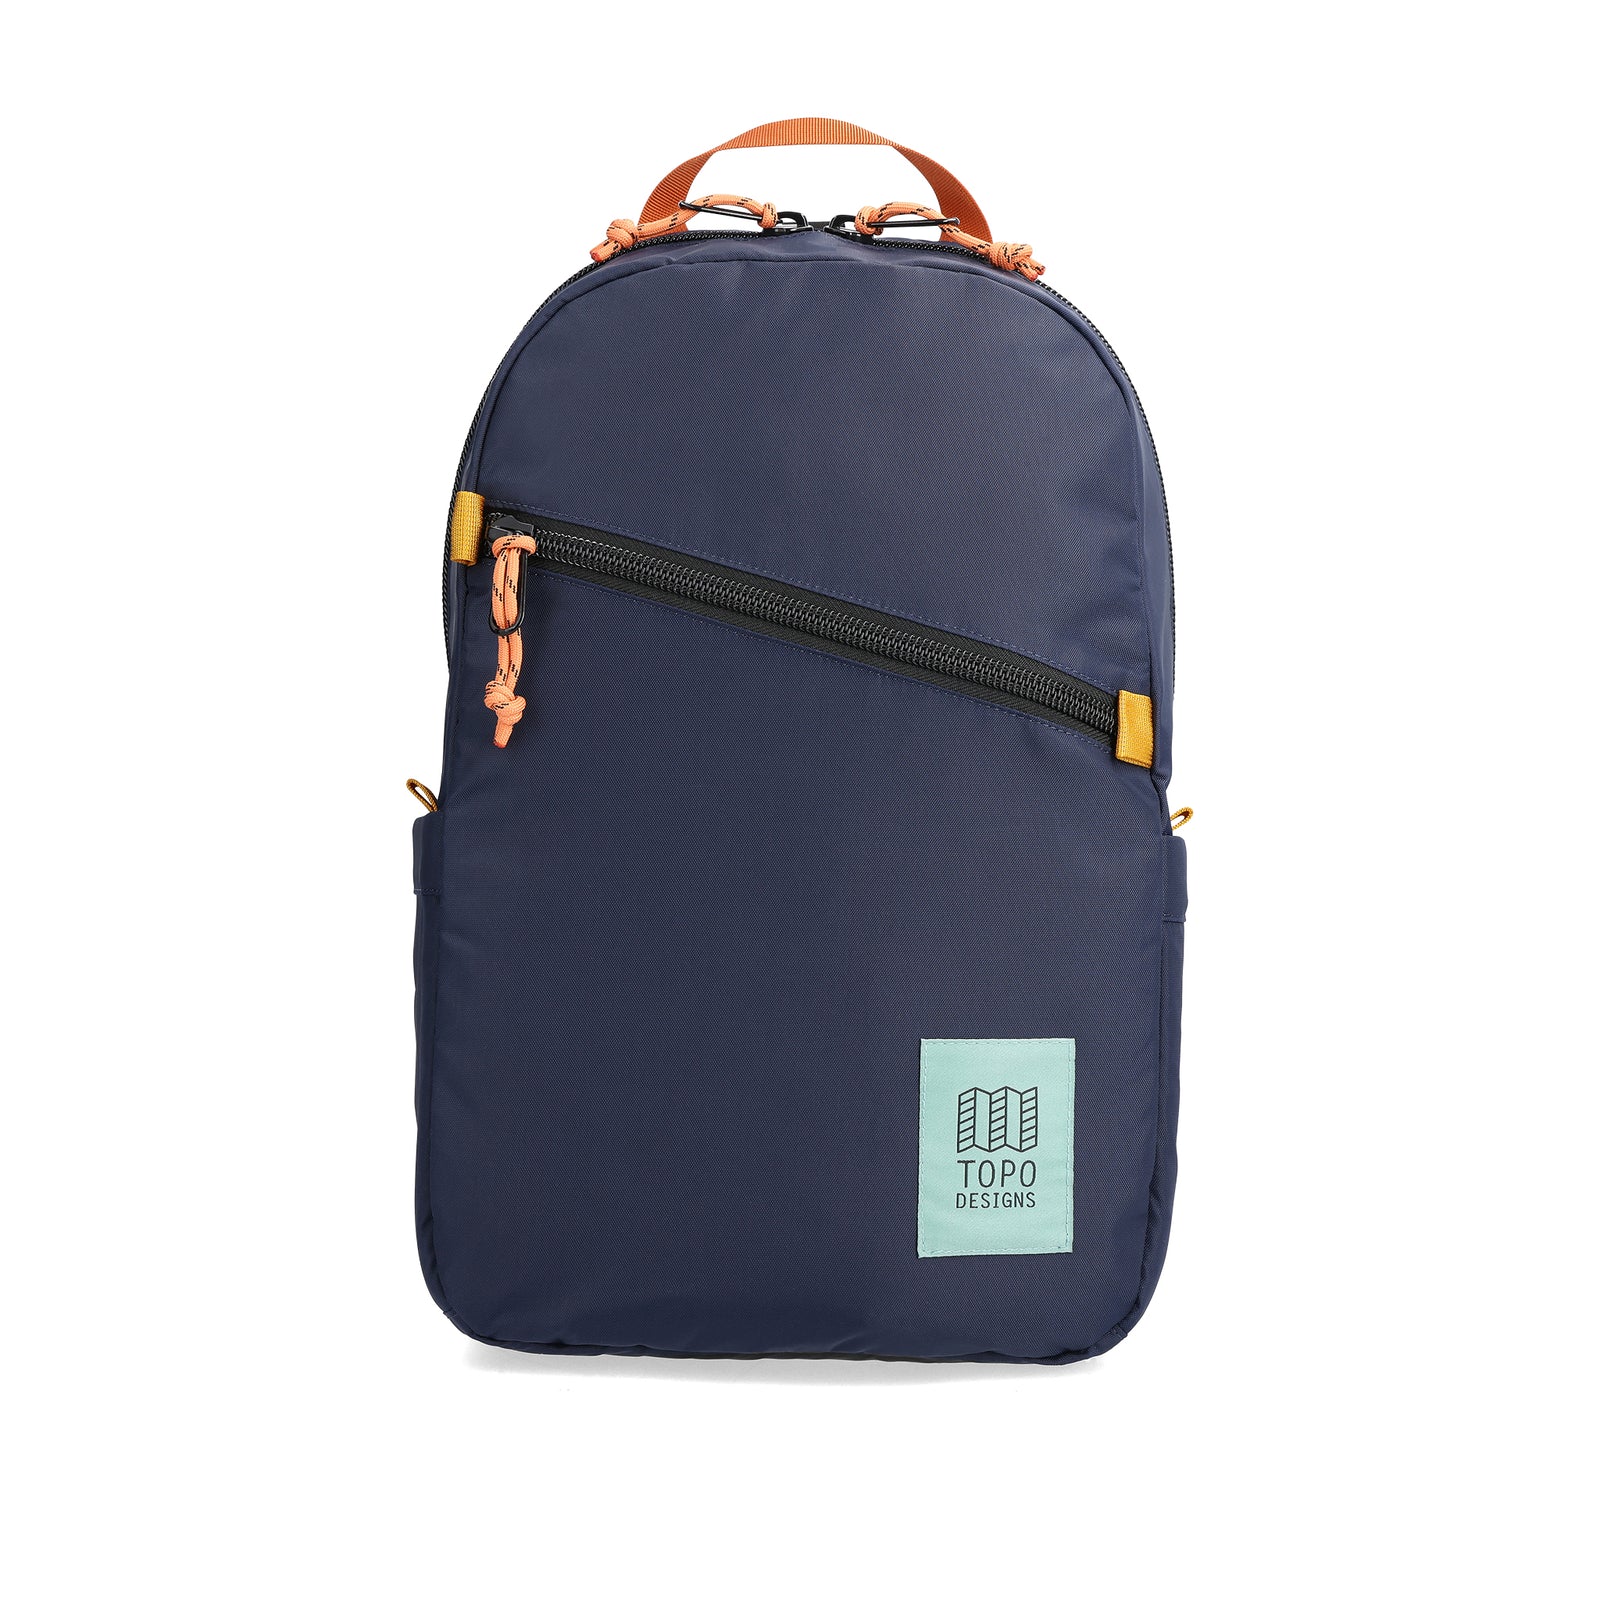 Front View of Topo Designs Light Pack in "Navy / Multi"